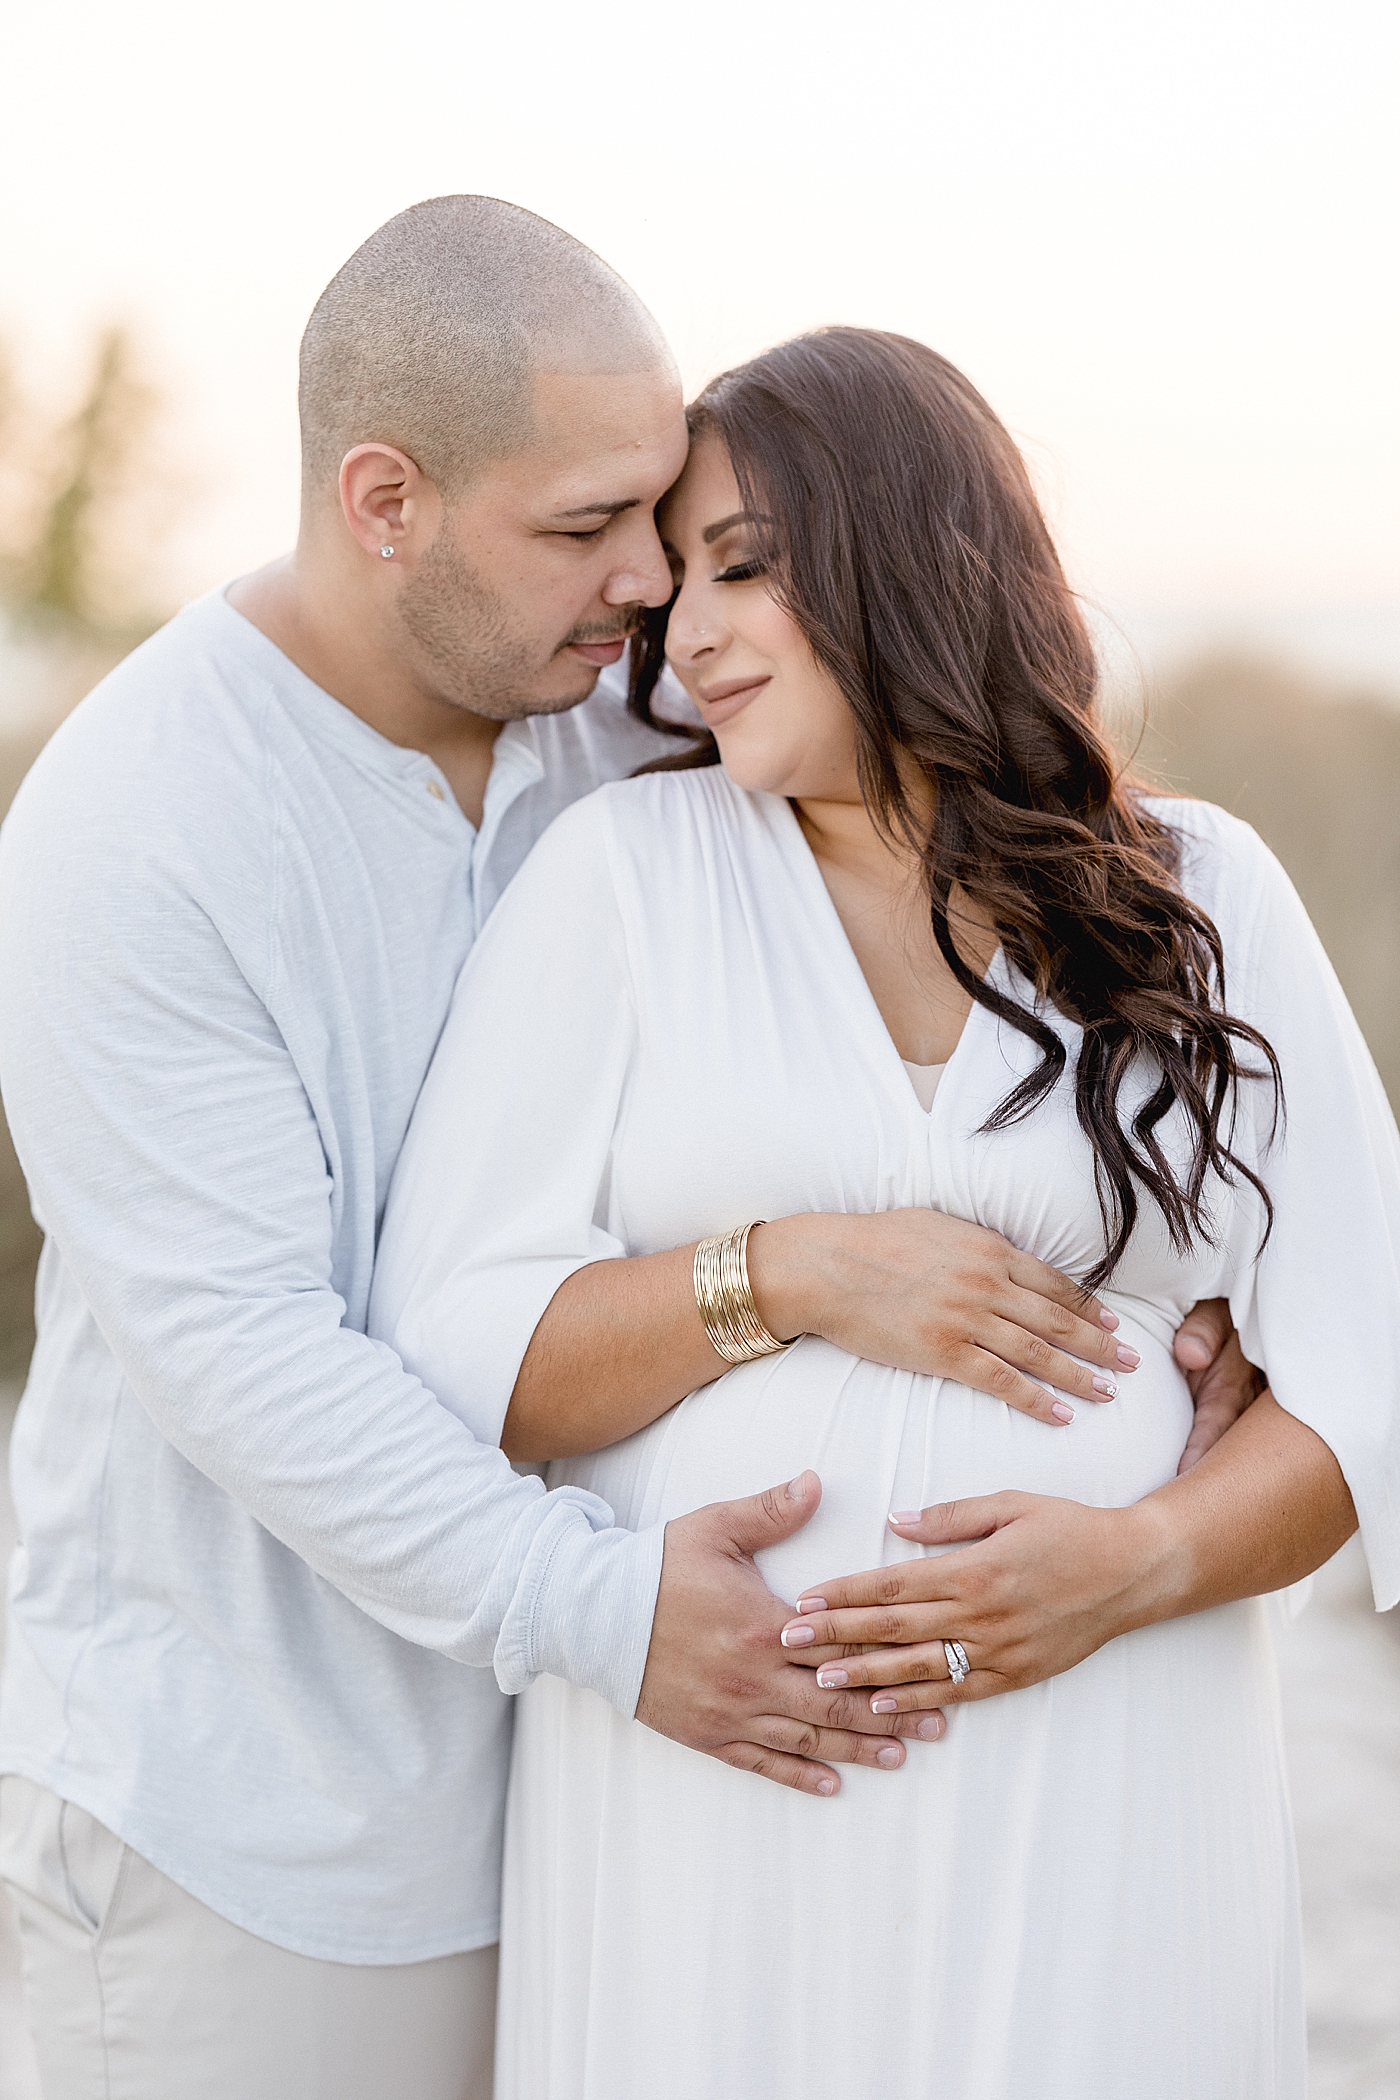 Outdoor maternity photoshoot in Tampa, Fl. Photo by Brittany Elise Photography.